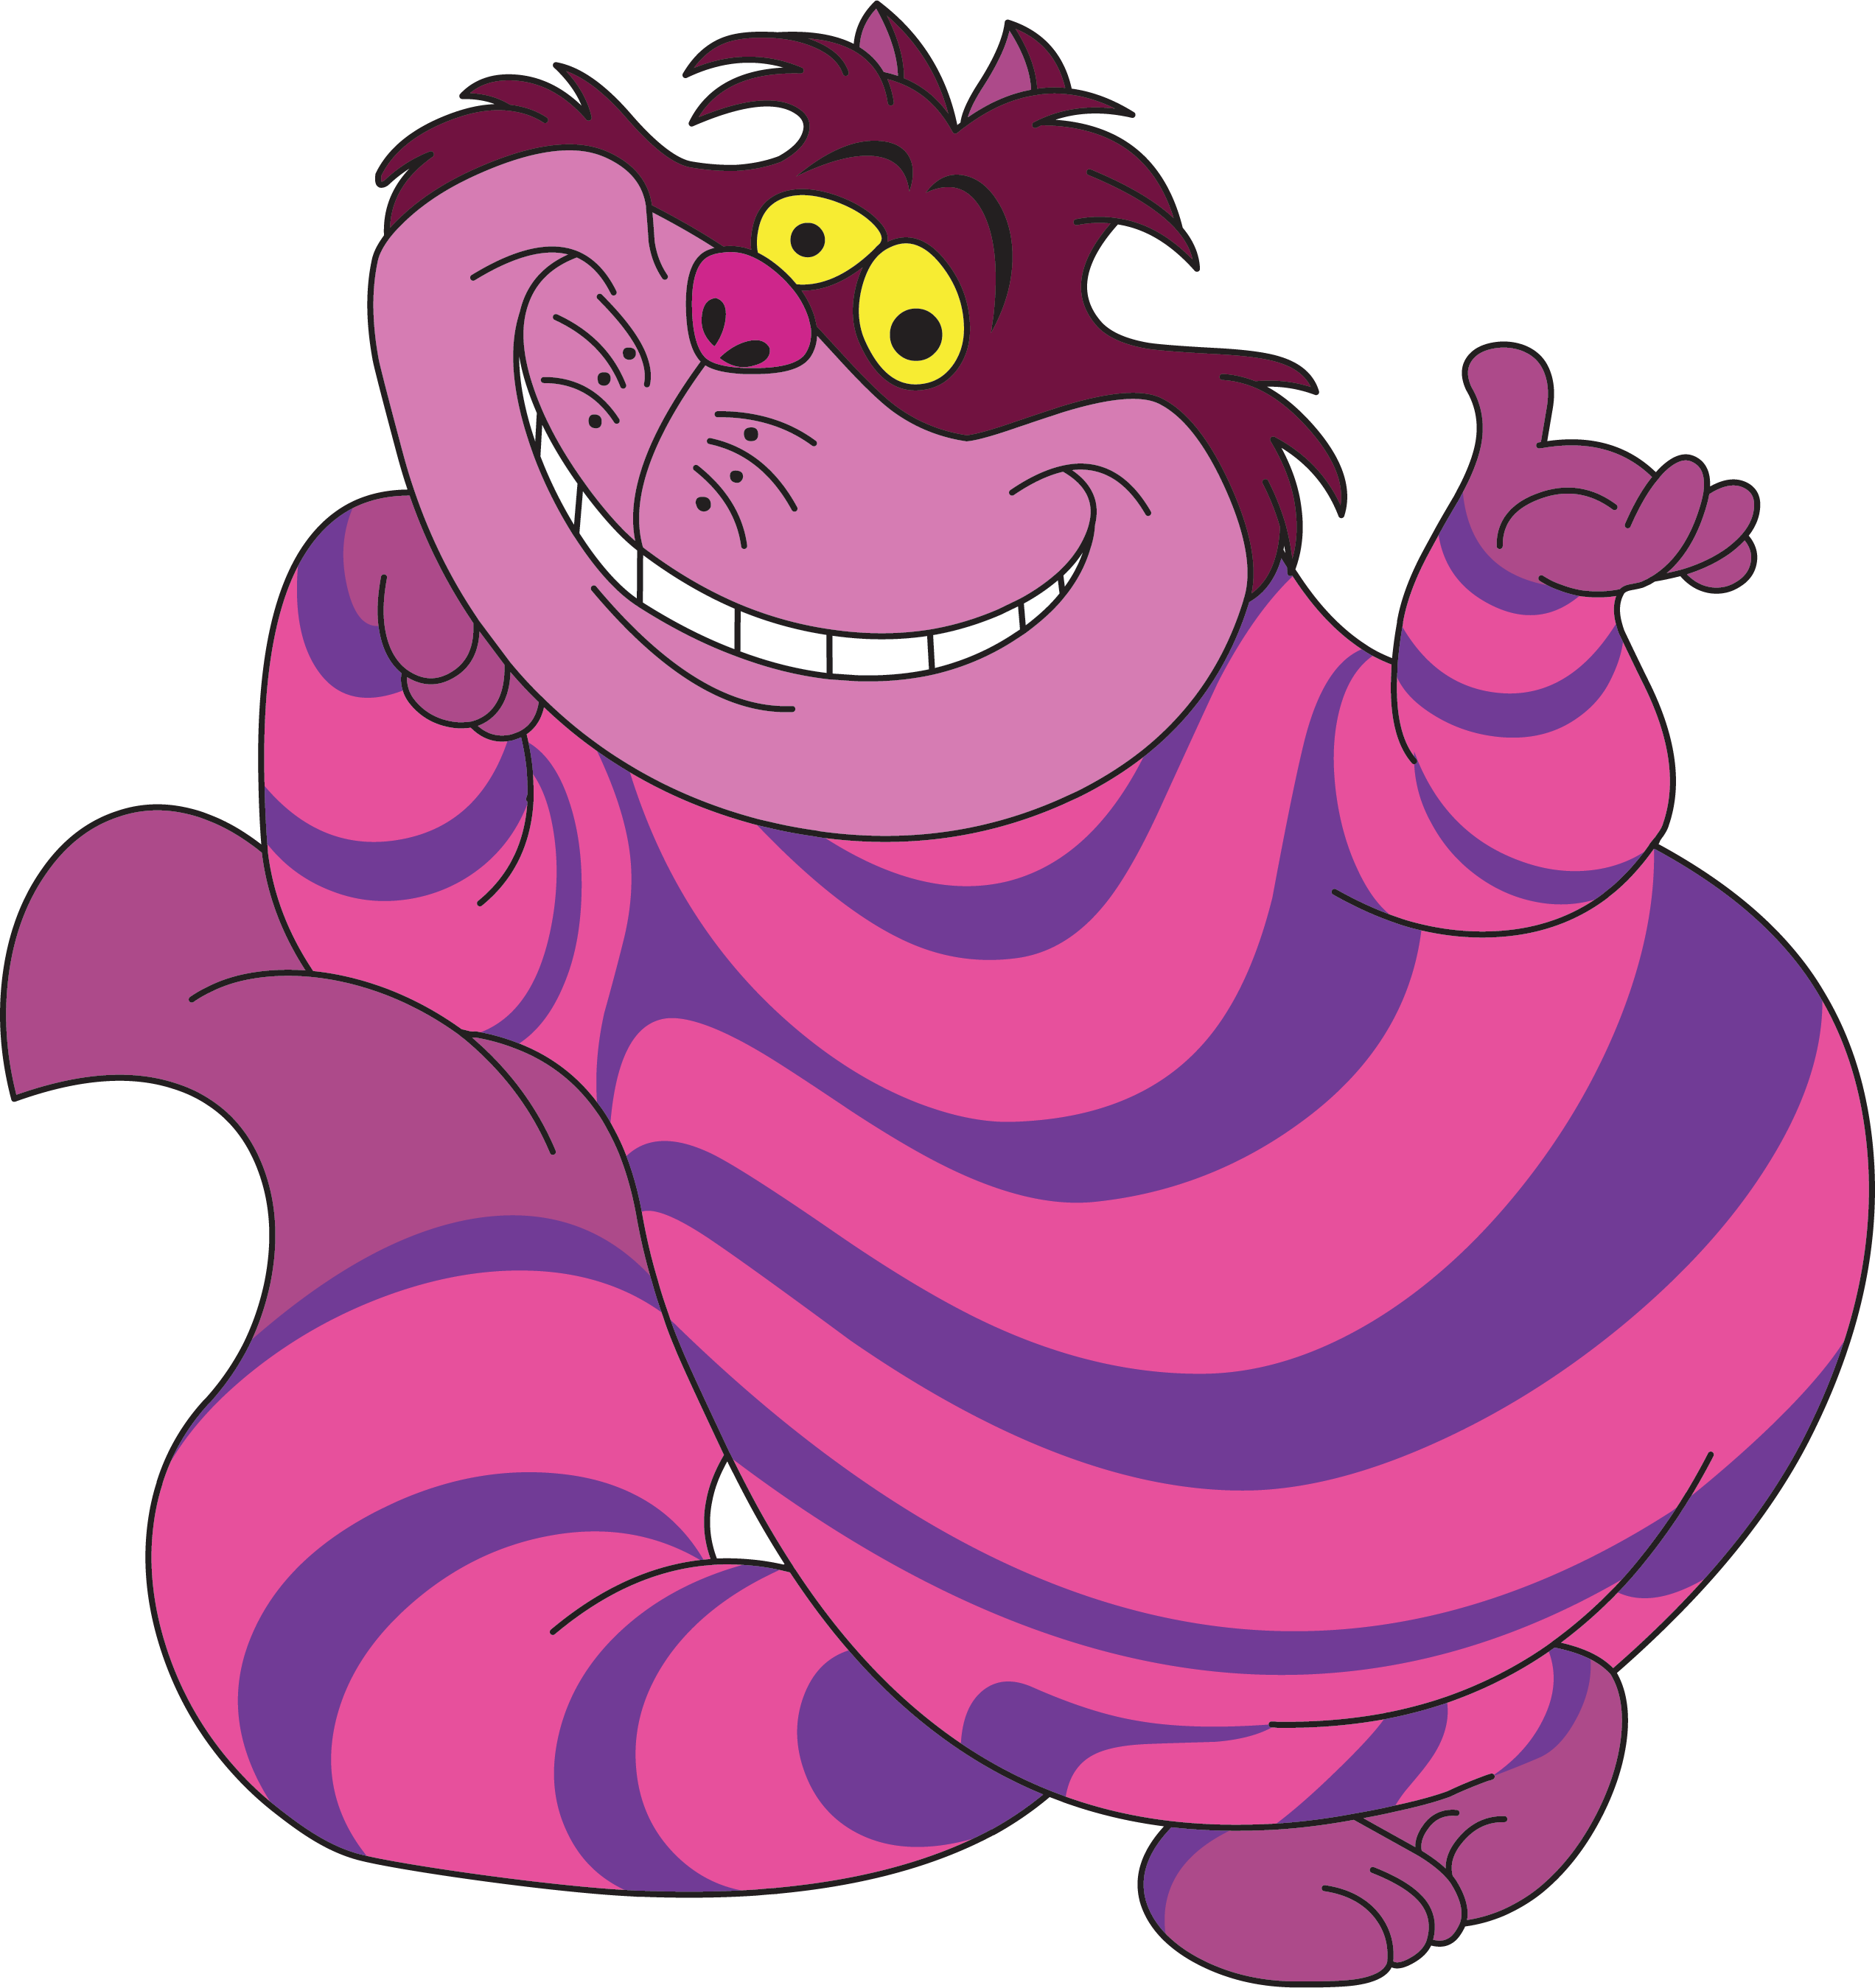 Cheshire Cat svg #5, Download drawings